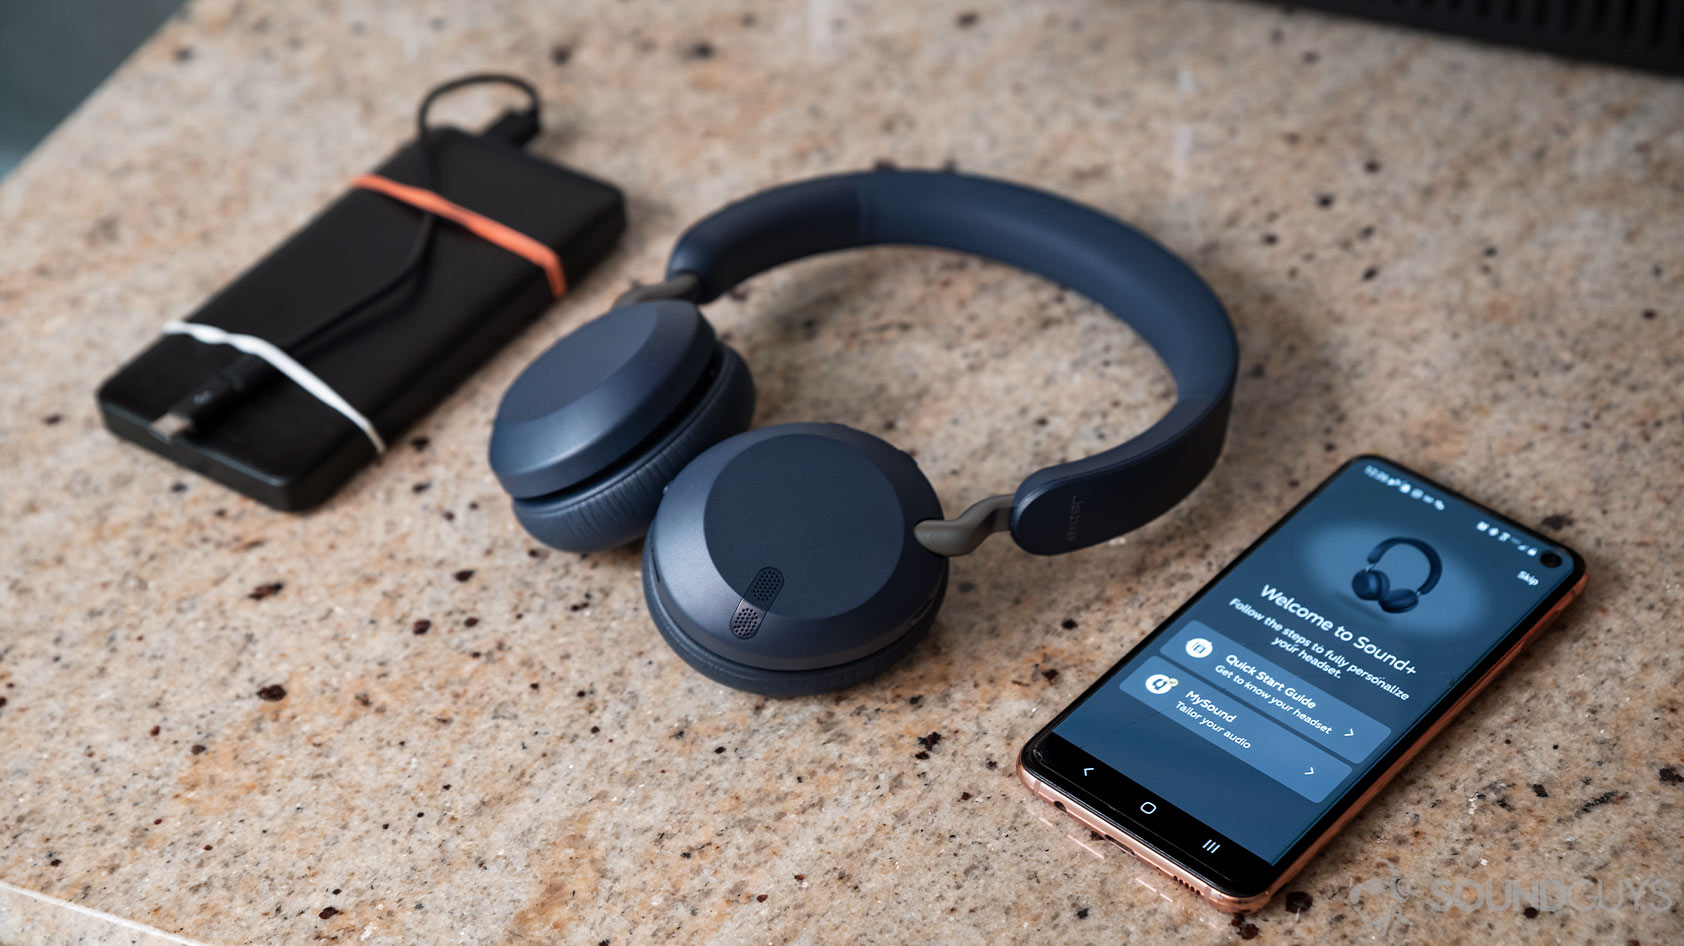 The Jabra Elite 45h on-ear Bluetooth headphones next to a Samsung Galaxy S10e smartphone with the Jabra MySound+ application open.